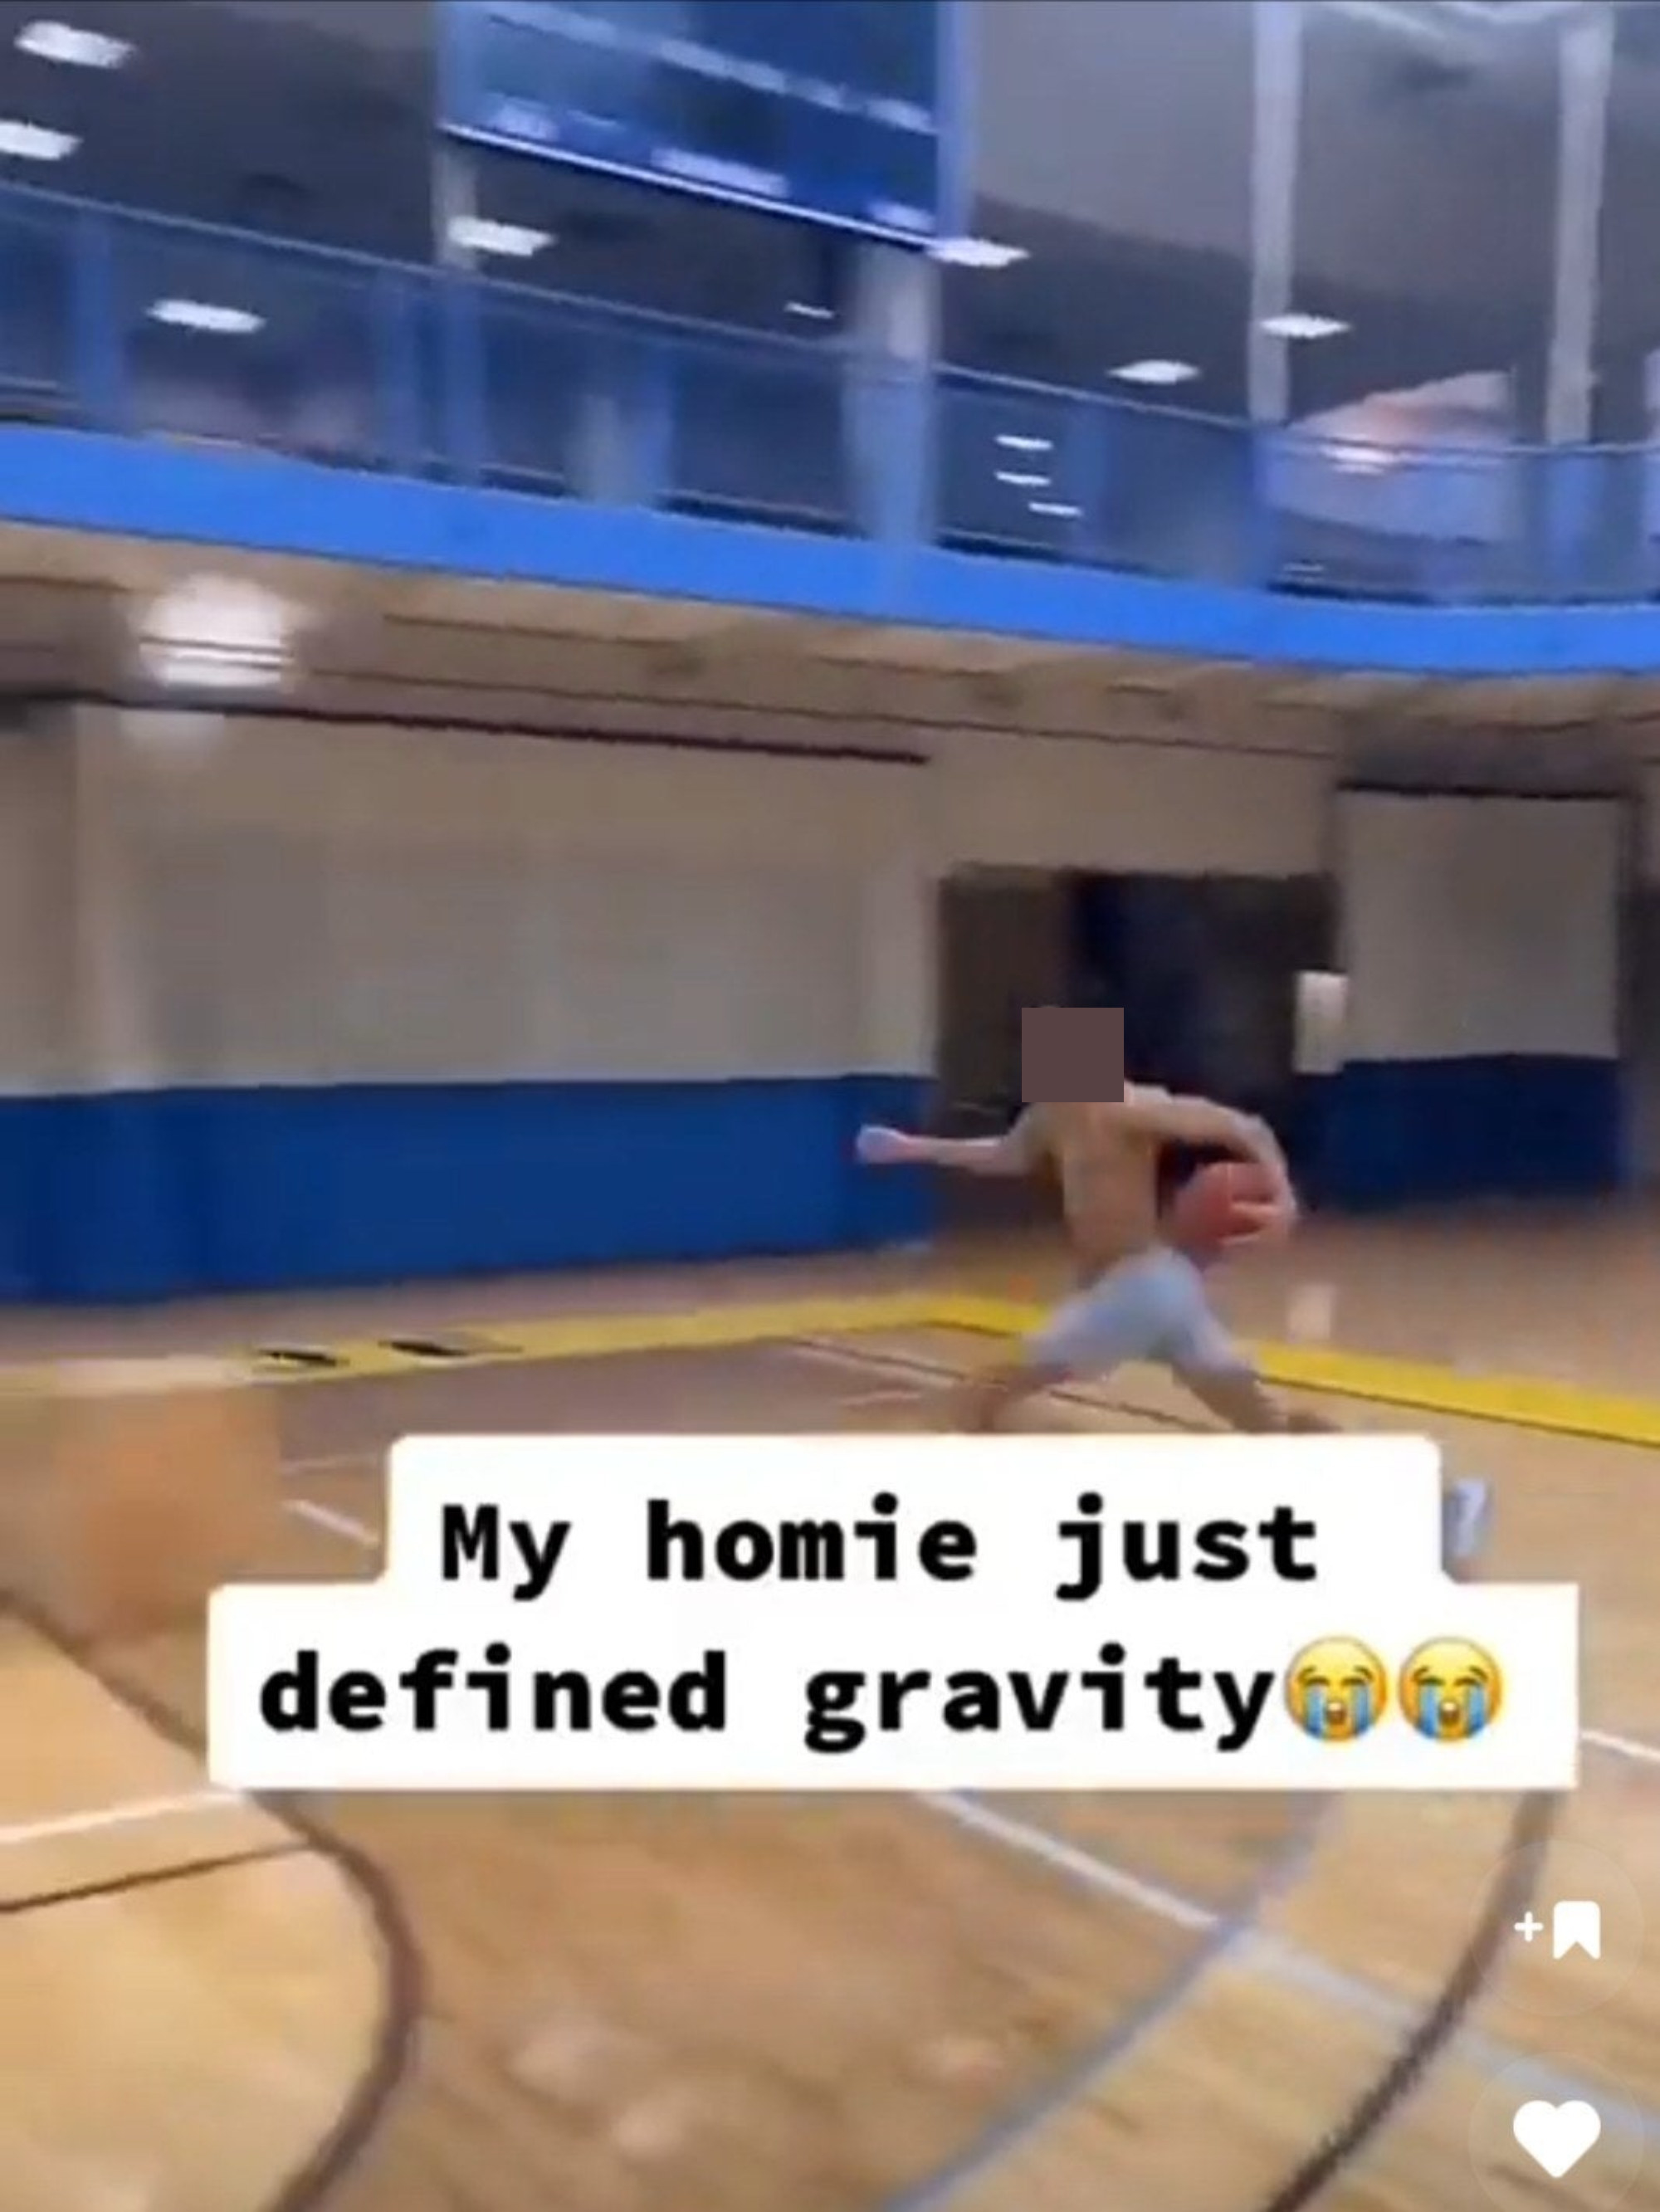 person saying defined gravity instead of defied